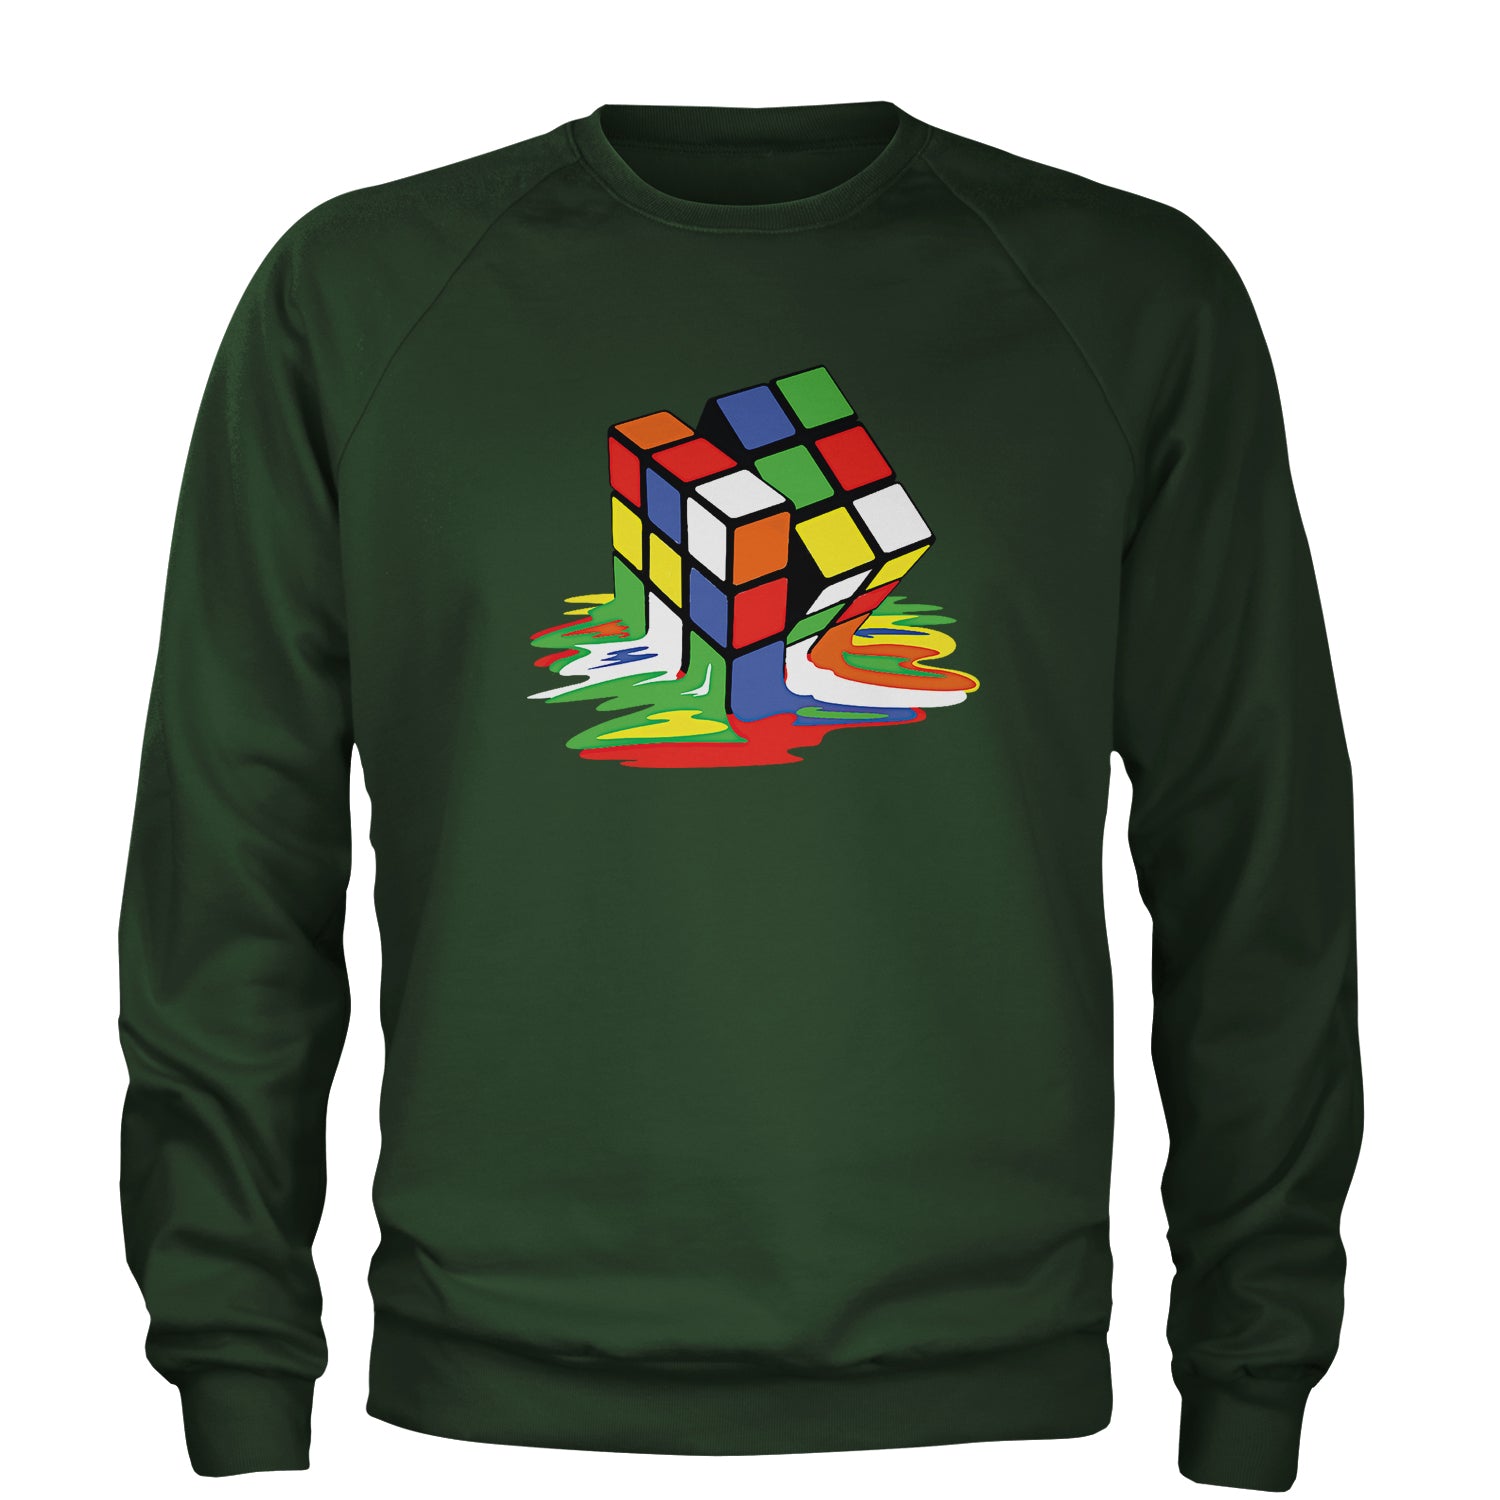 Melting Multi-Colored Cube Adult Crewneck Sweatshirt gamer, gaming, nerd, shirt by Expression Tees